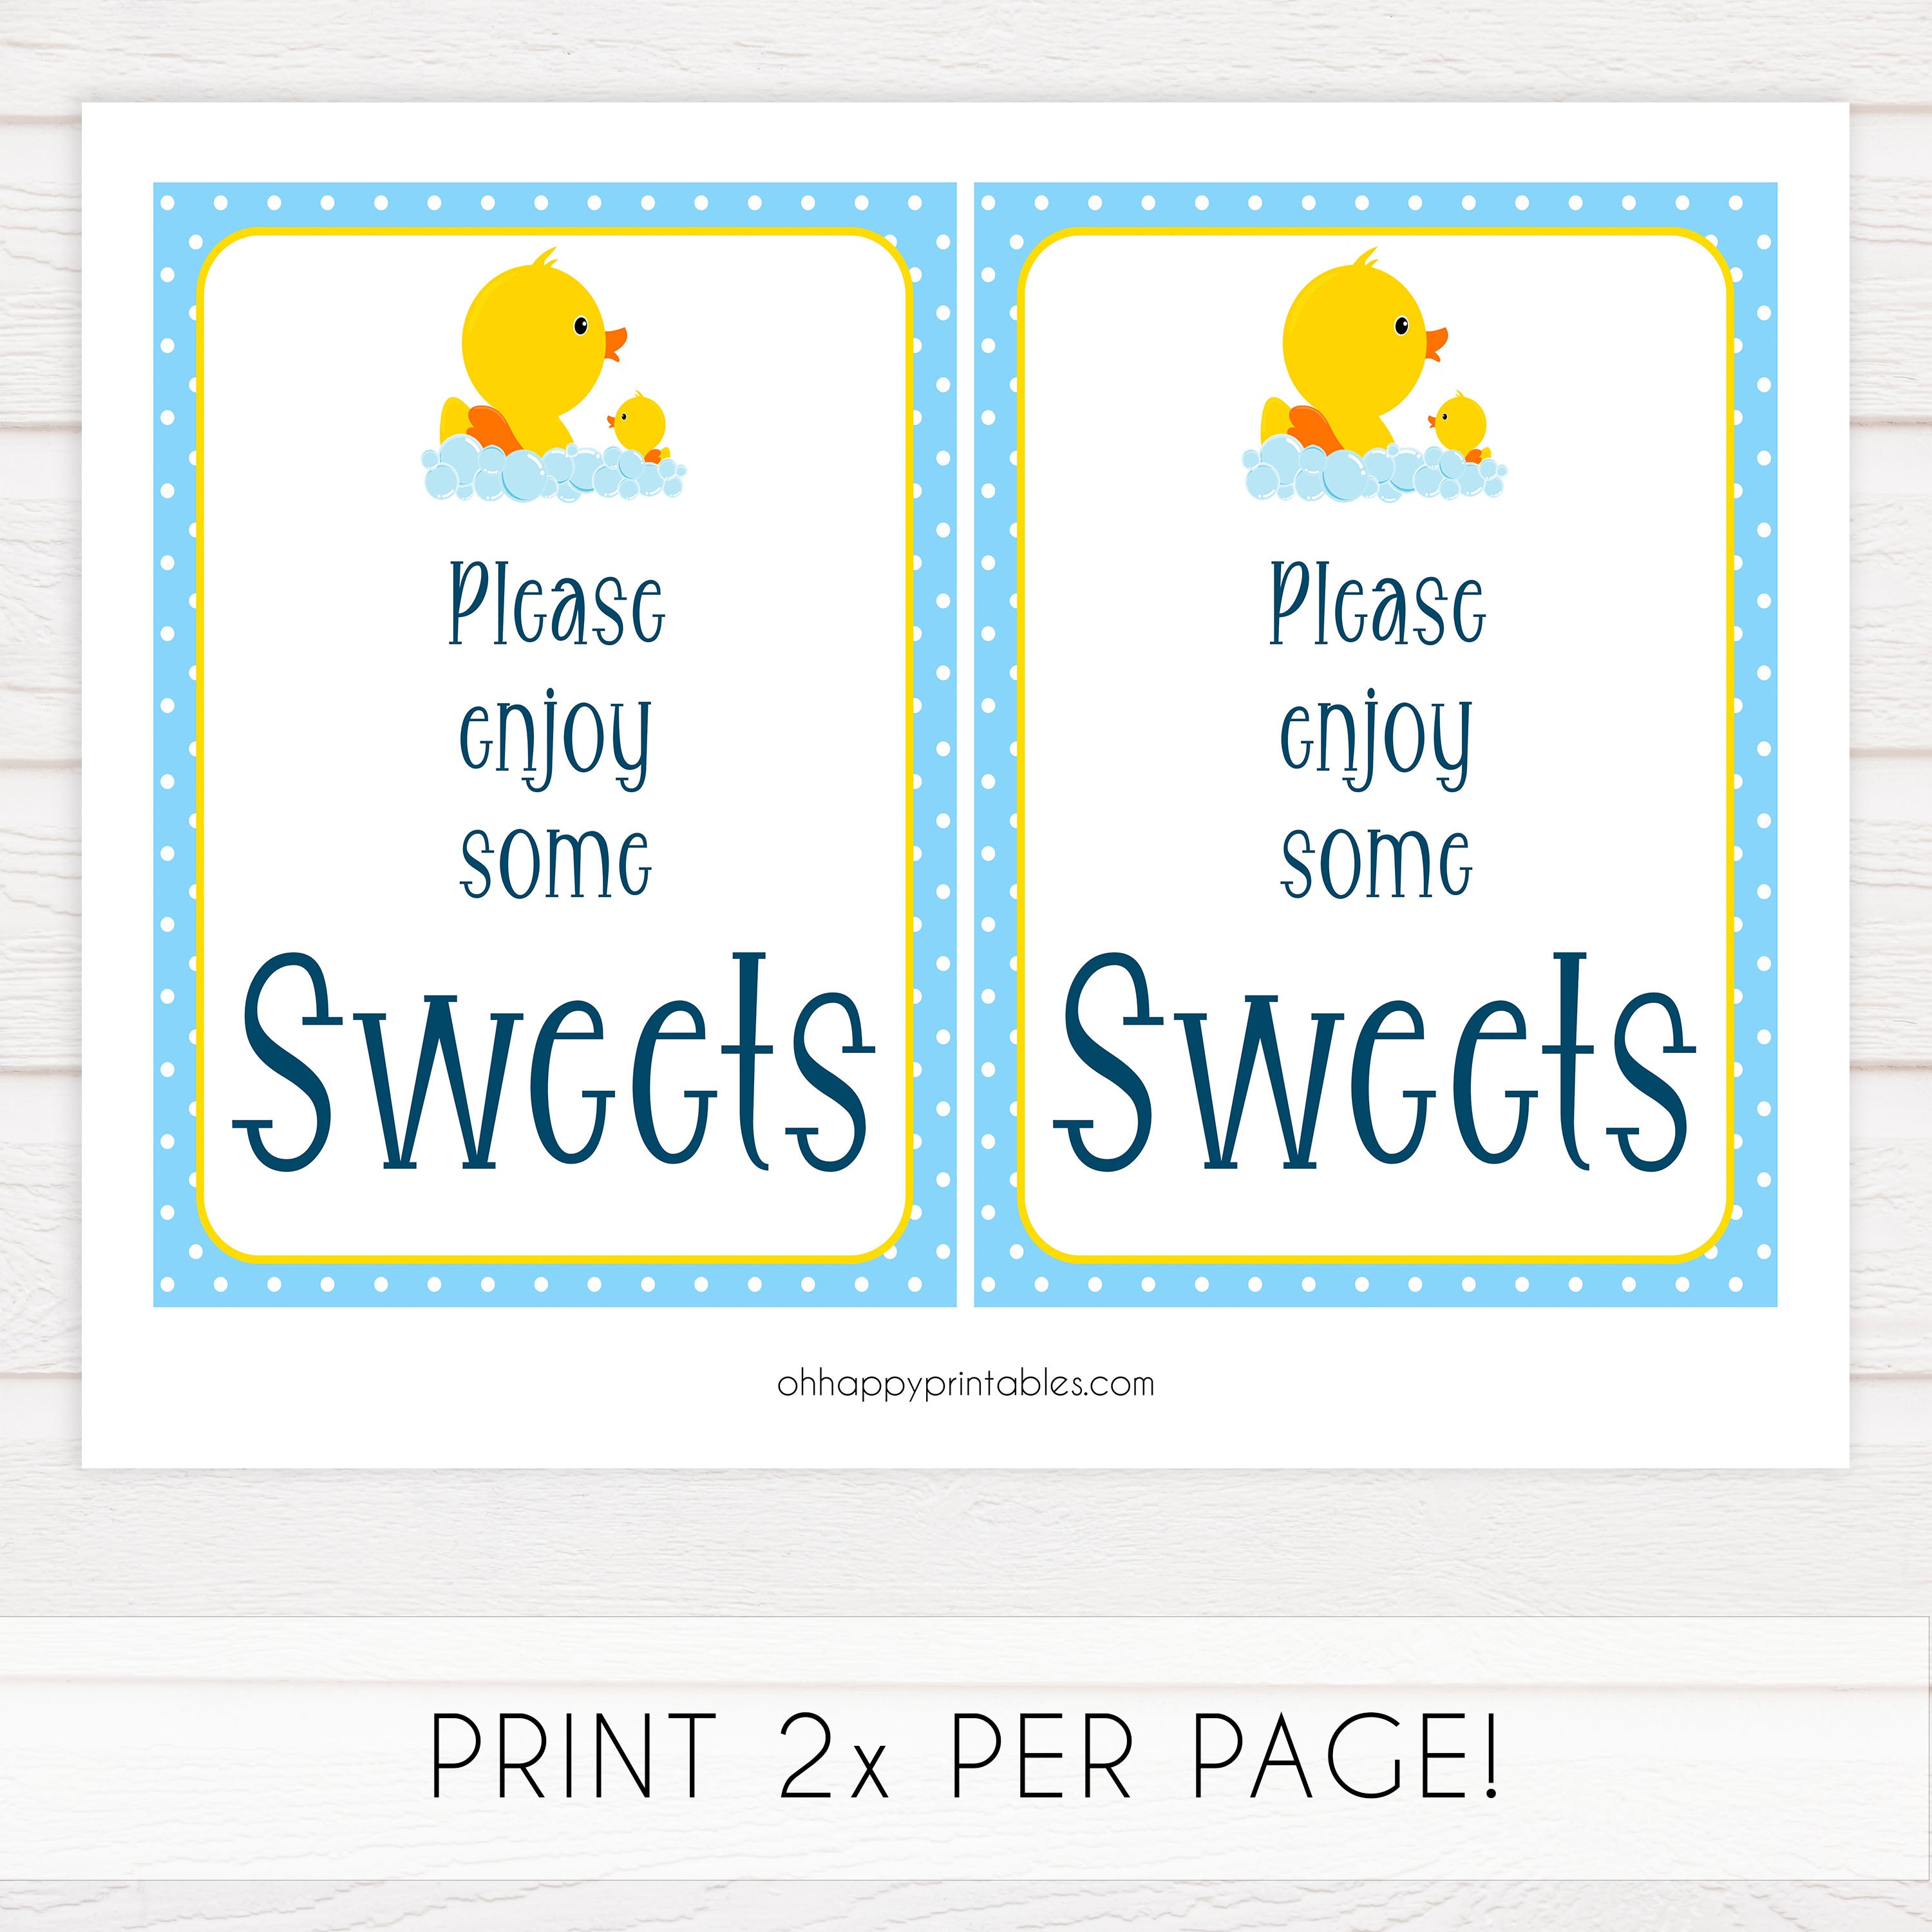 rubber ducky baby signs, sweets baby signs, printable baby signs, baby decor, fun baby decor, rubber ducky